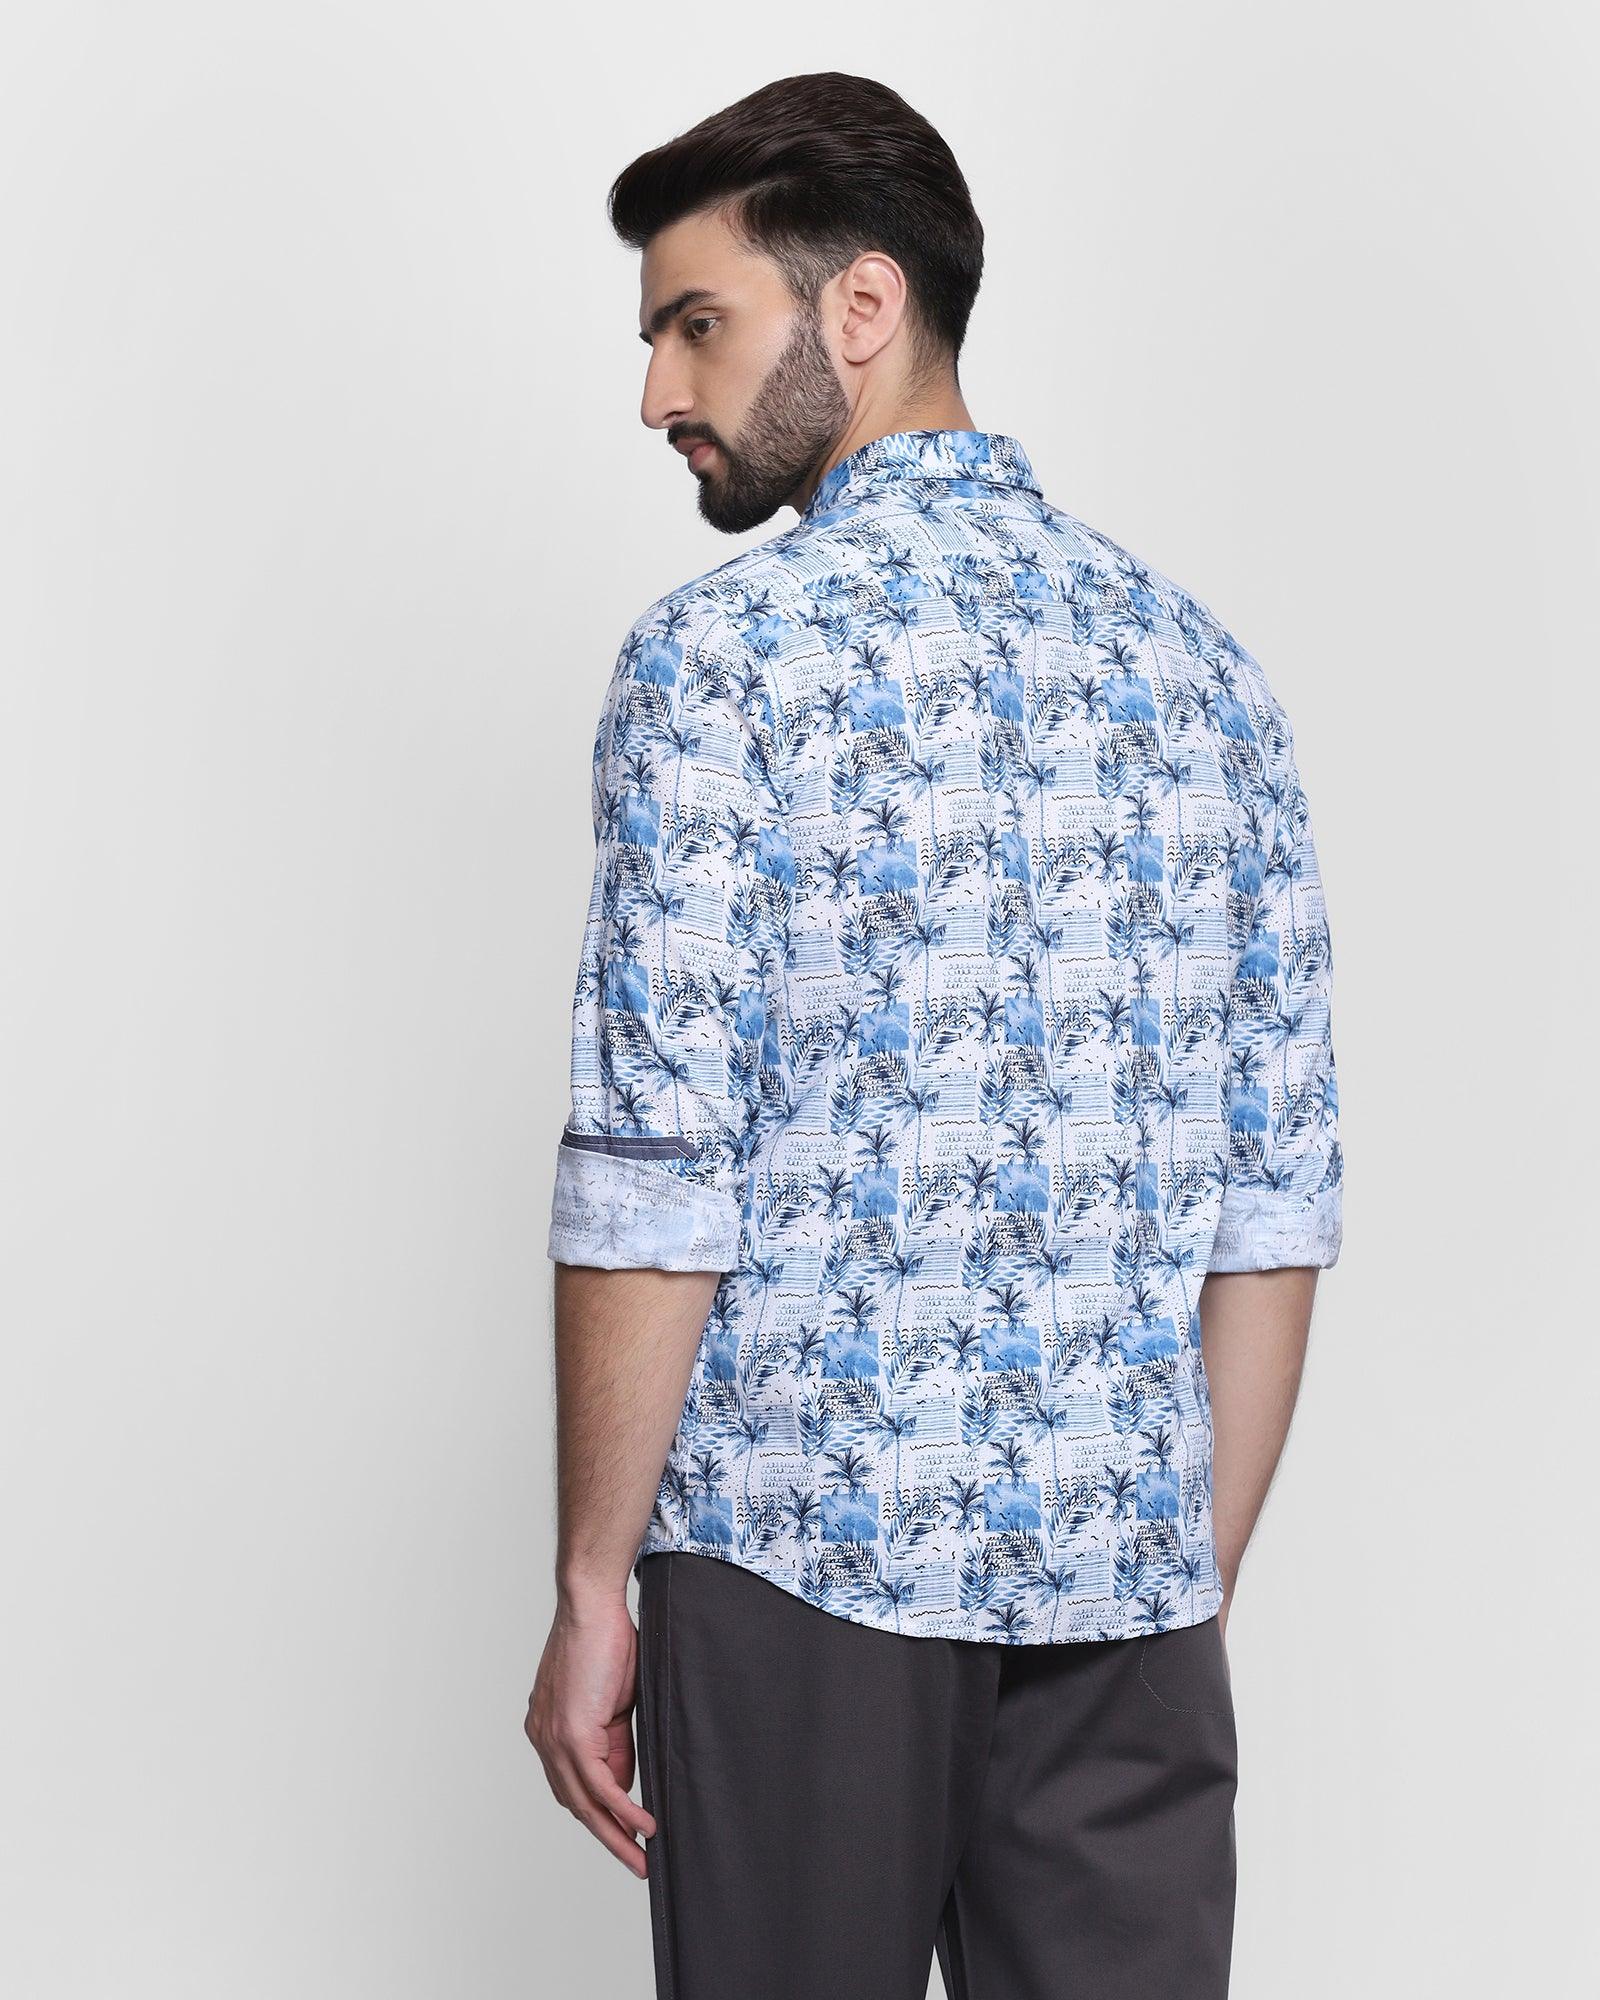 Linen Casual Blue Printed Shirt - Larry